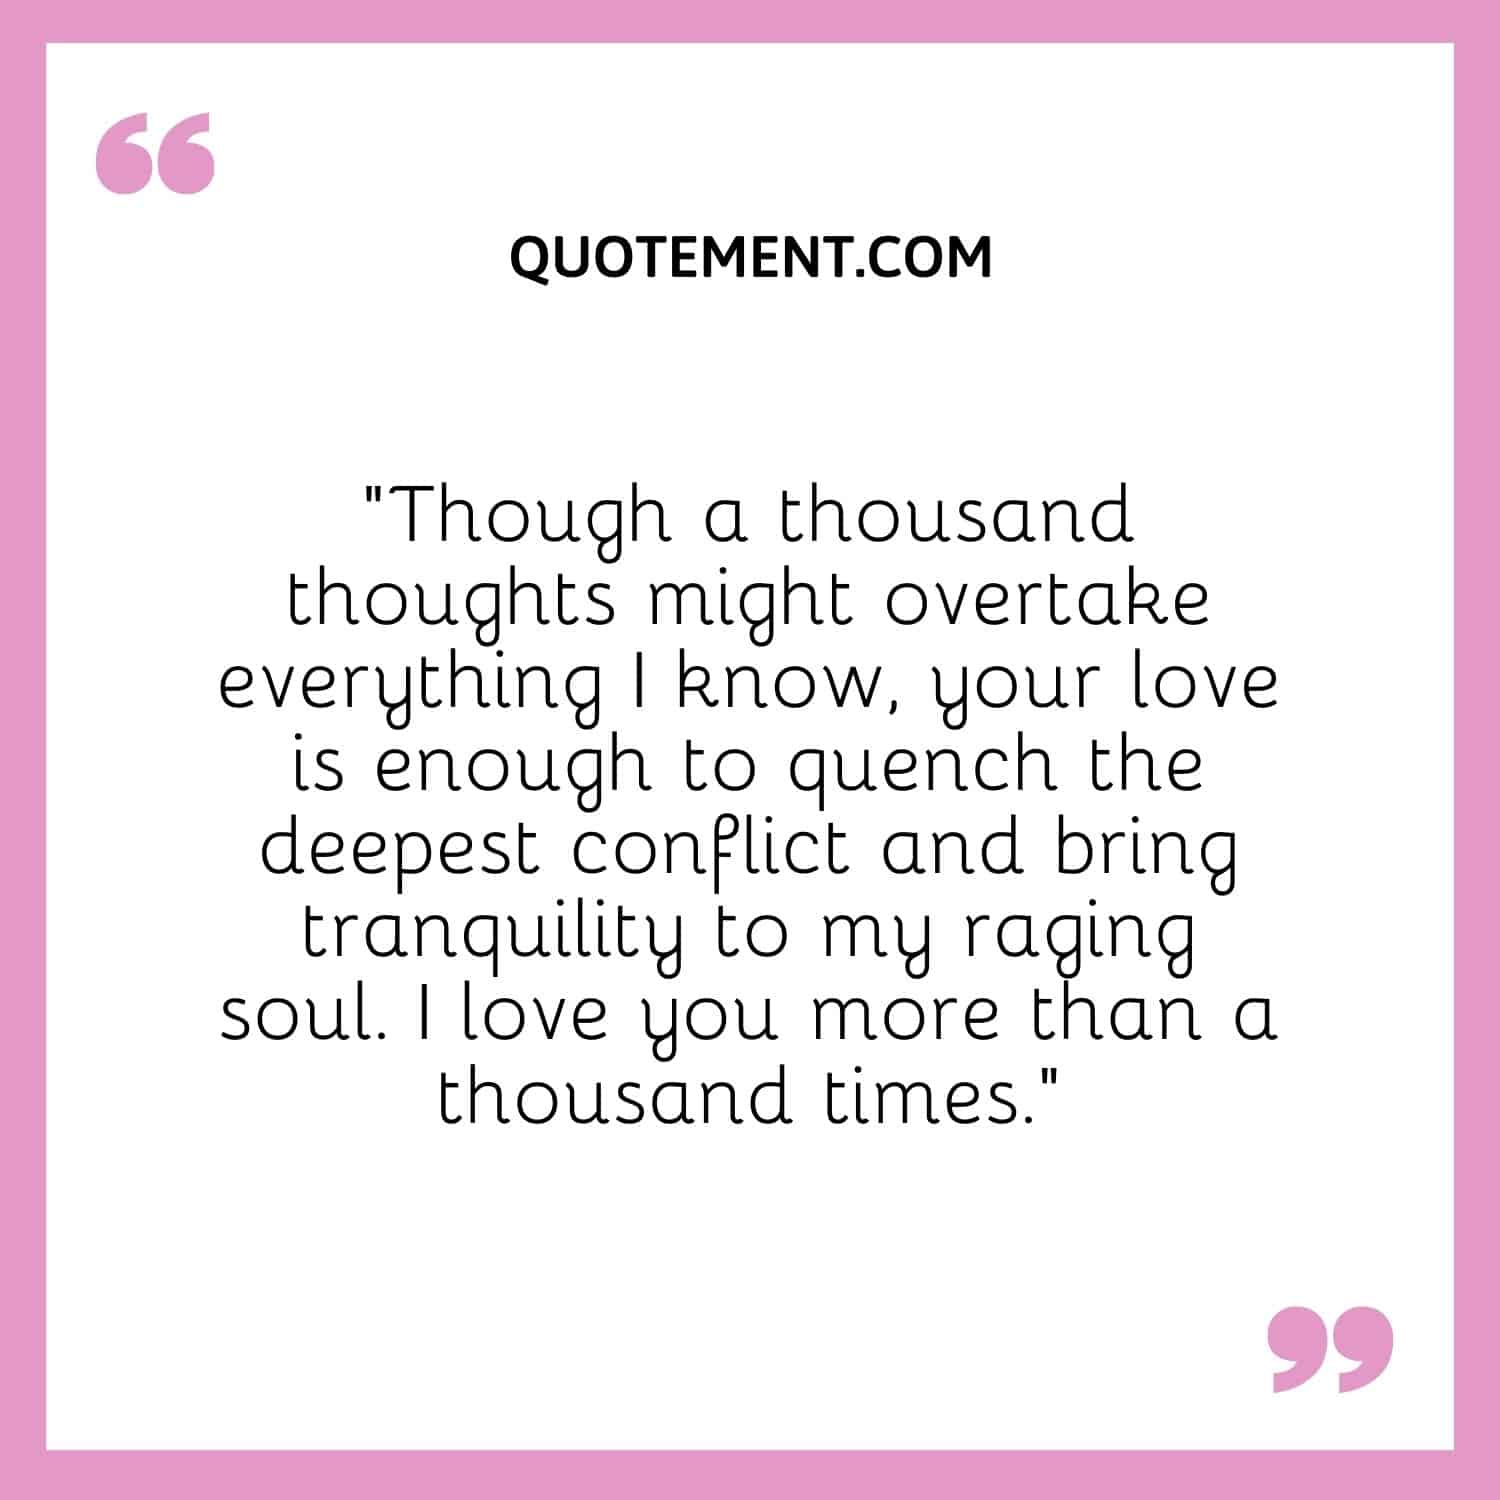 “Though a thousand thoughts might overtake everything I know, your love is enough to quench the deepest conflict and bring tranquility to my raging soul. I love you more than a thousand times.”